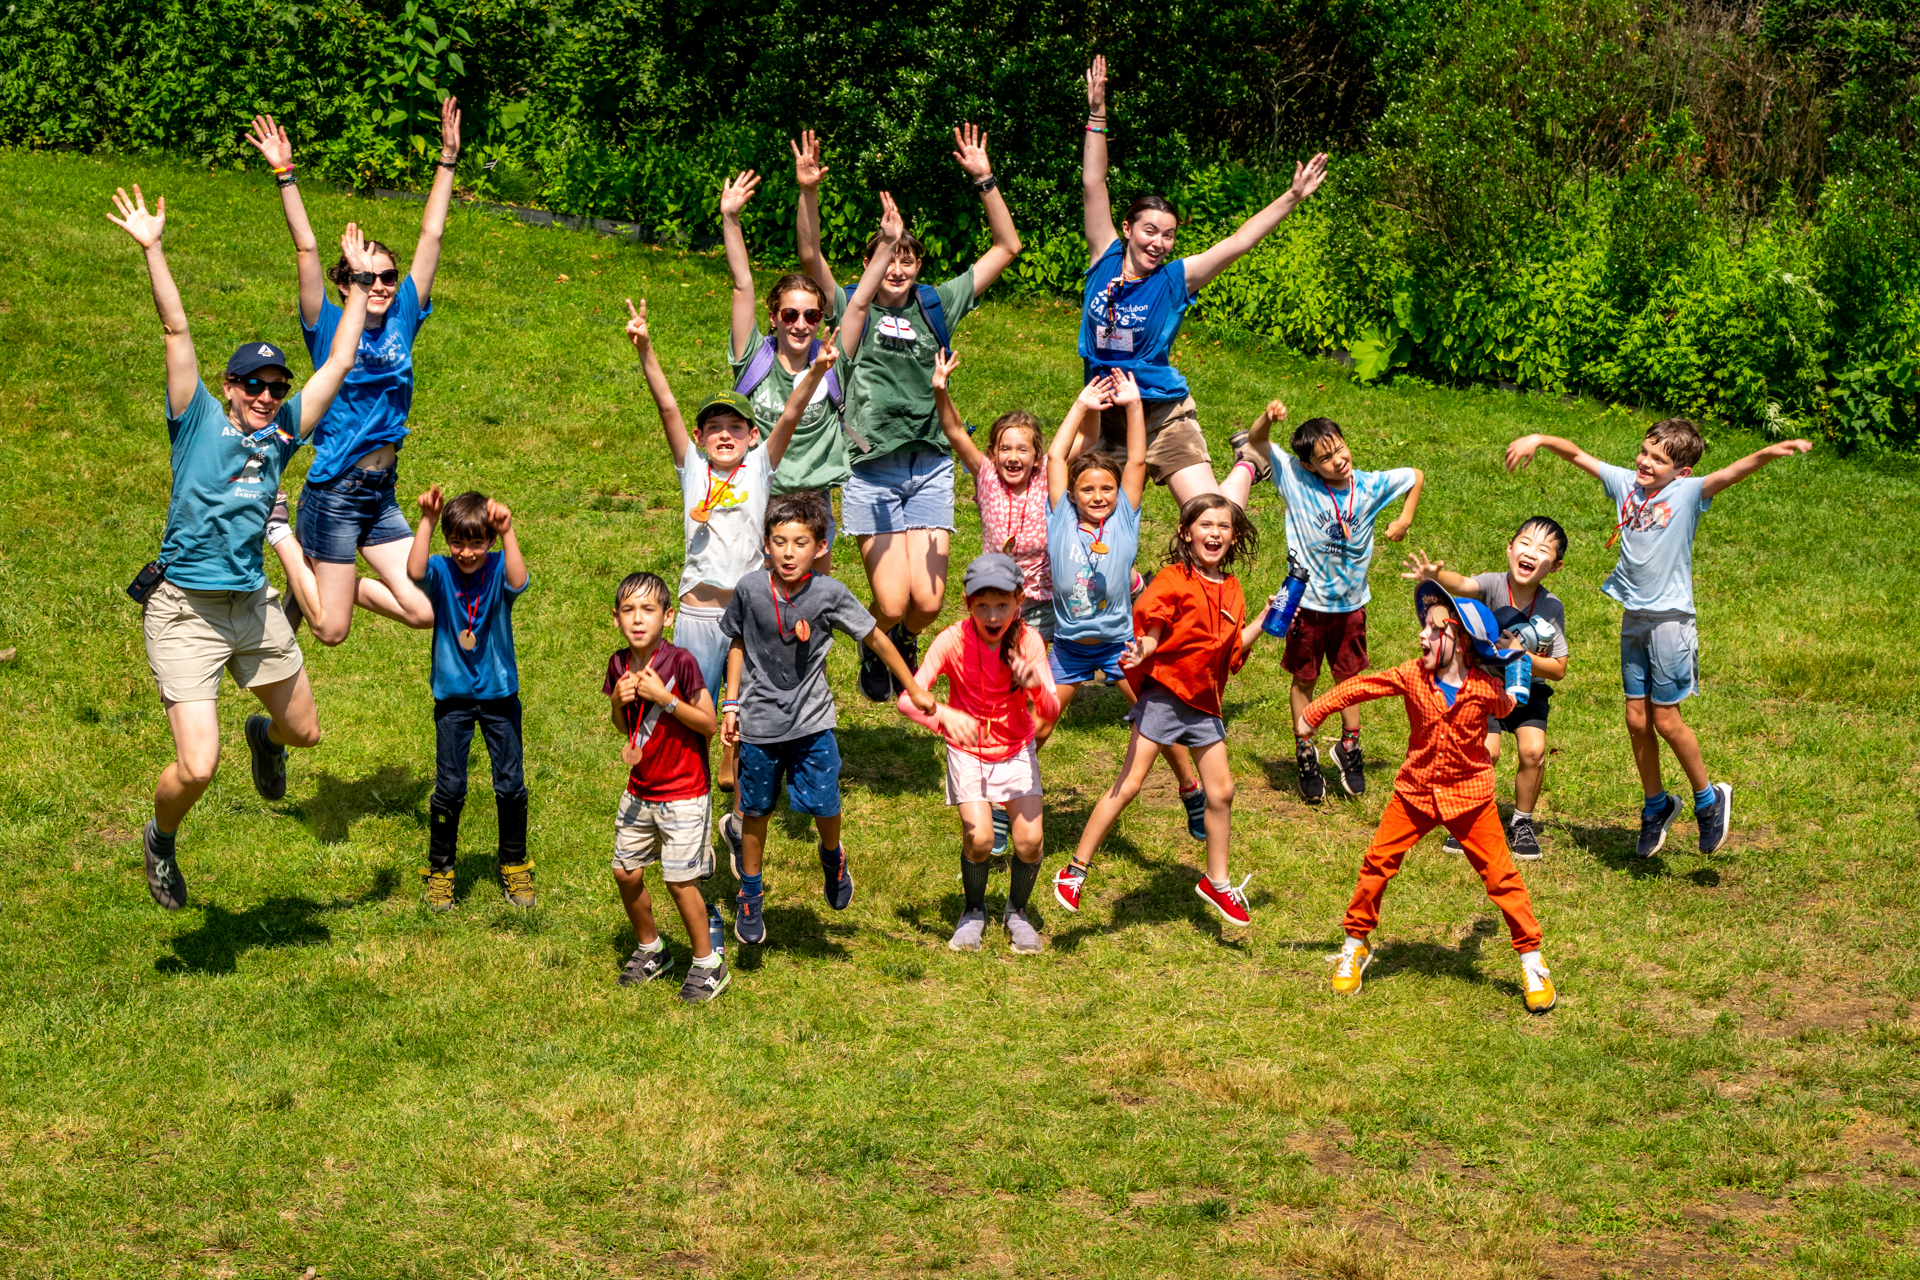 A group of smiling Broadmoor campers and counselors jumping into the air with their arms raised